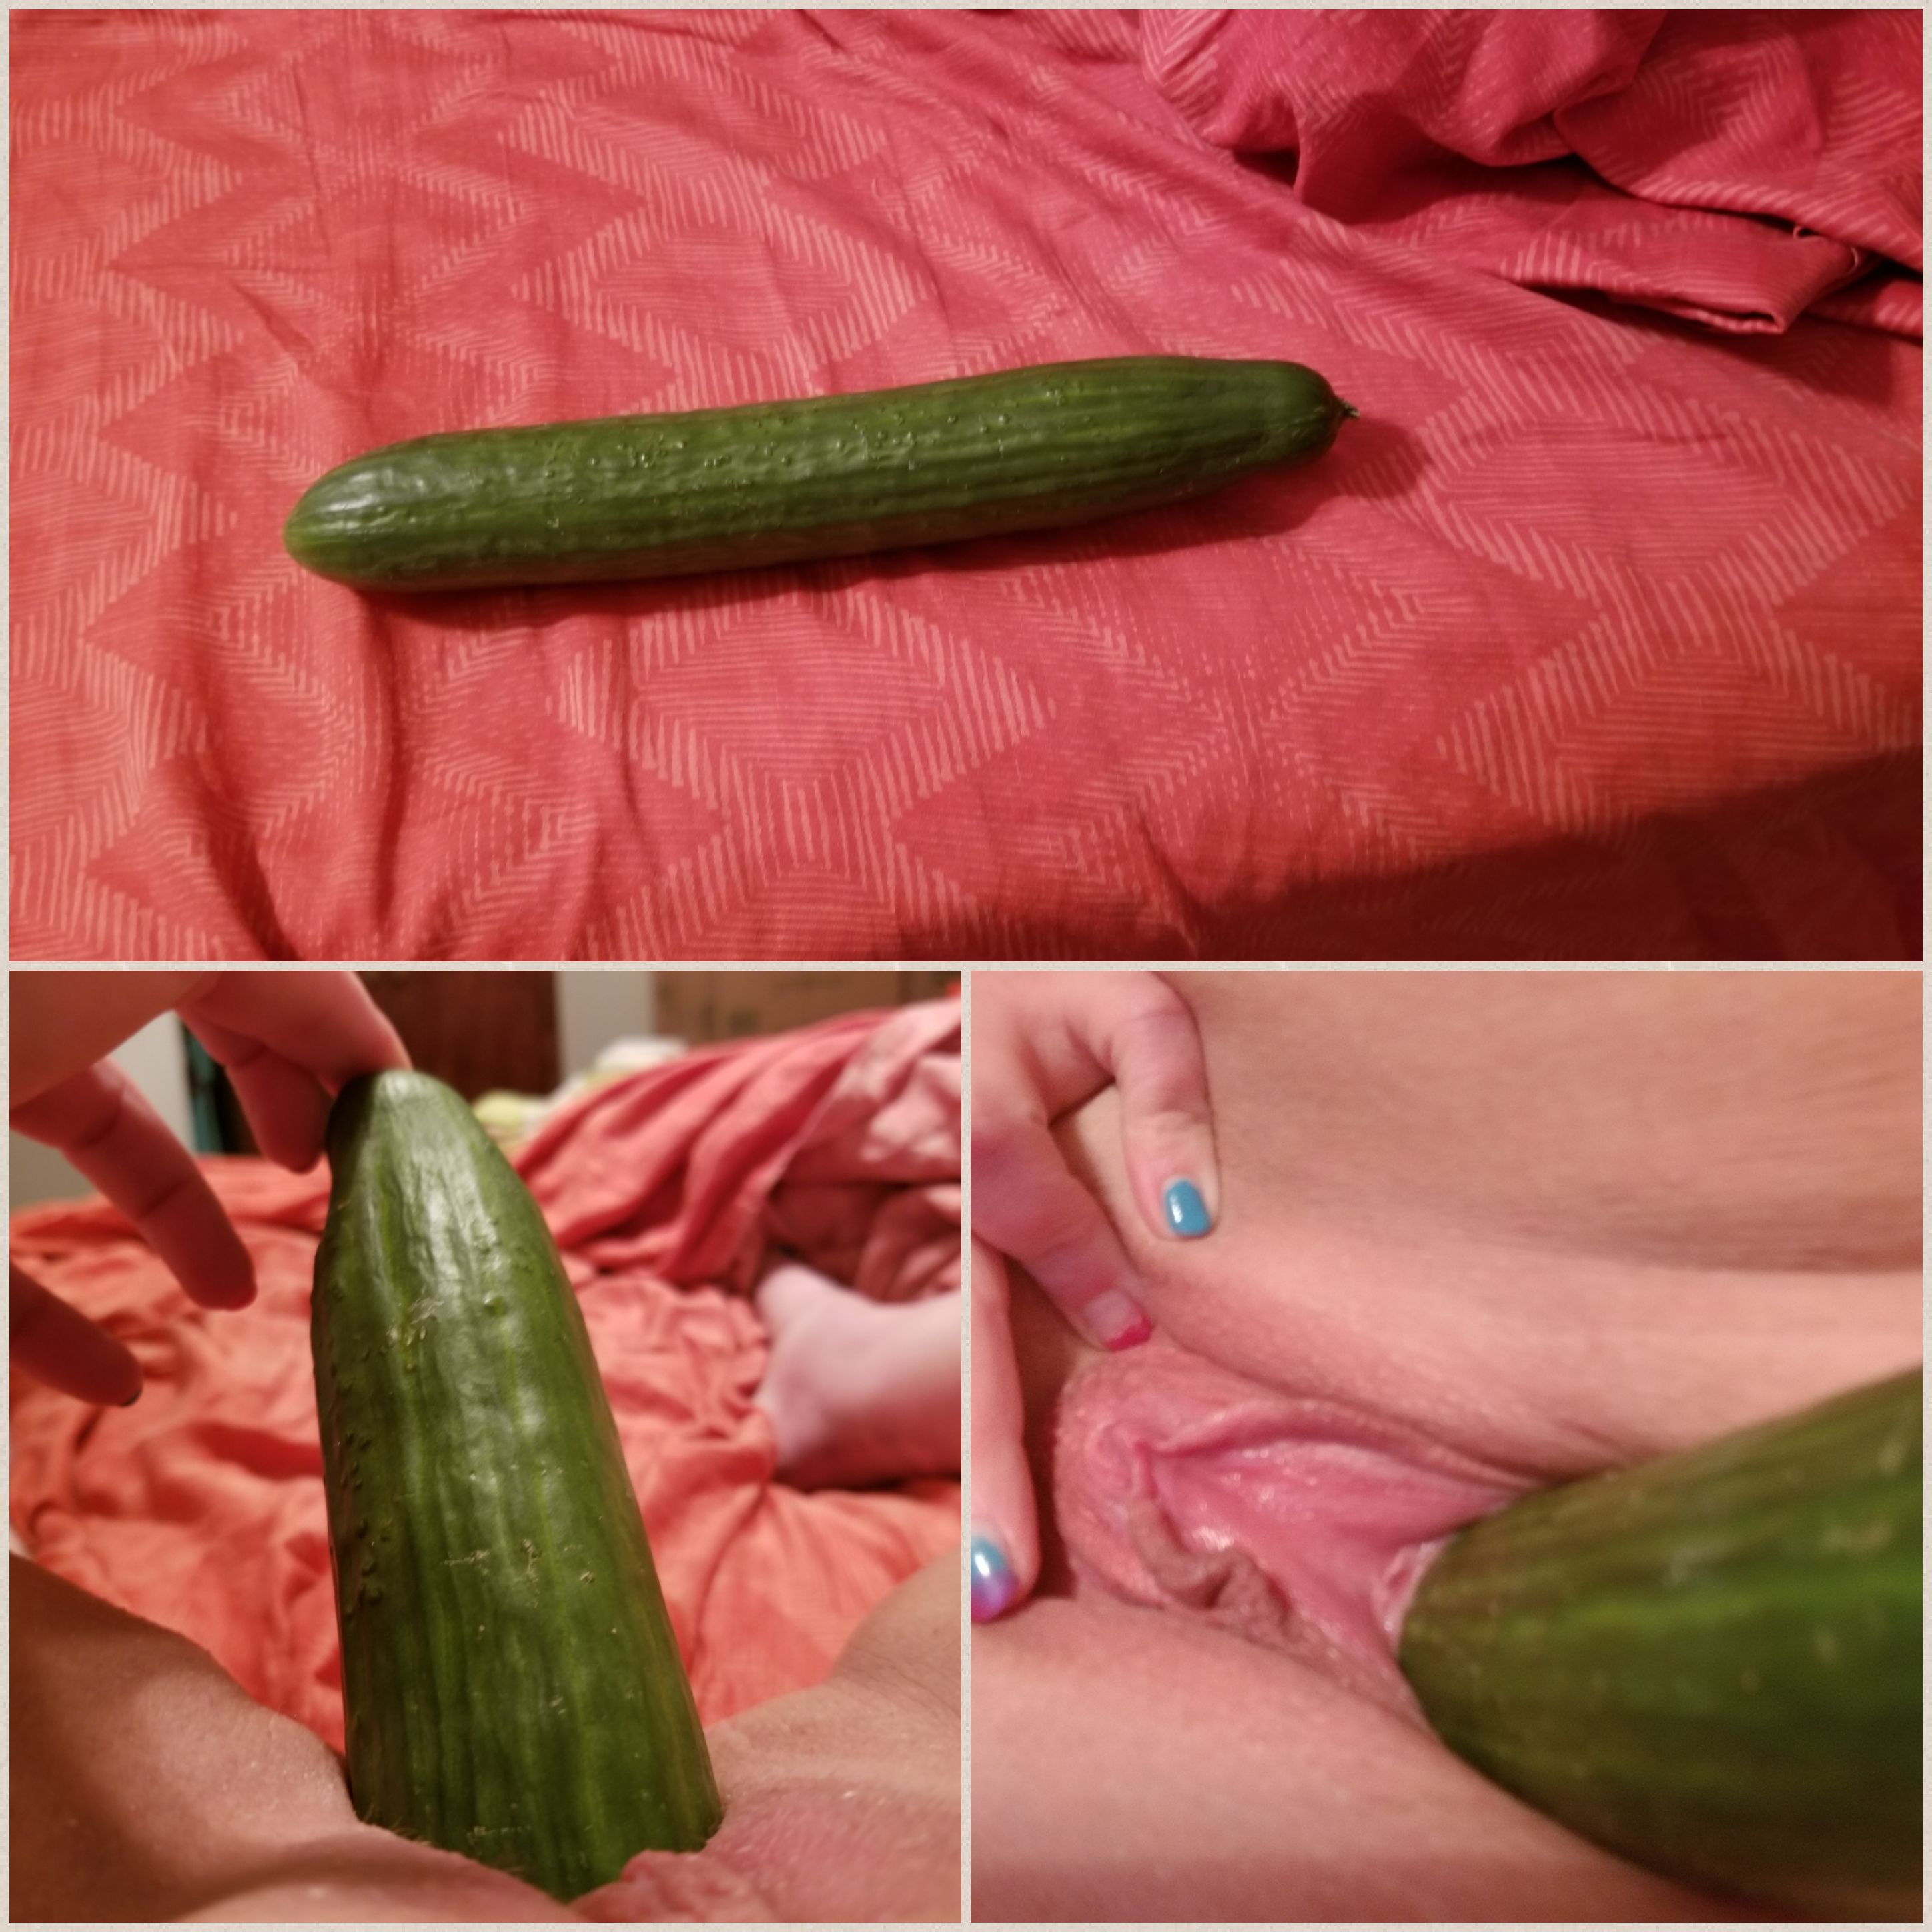 Common cucumber...as requested